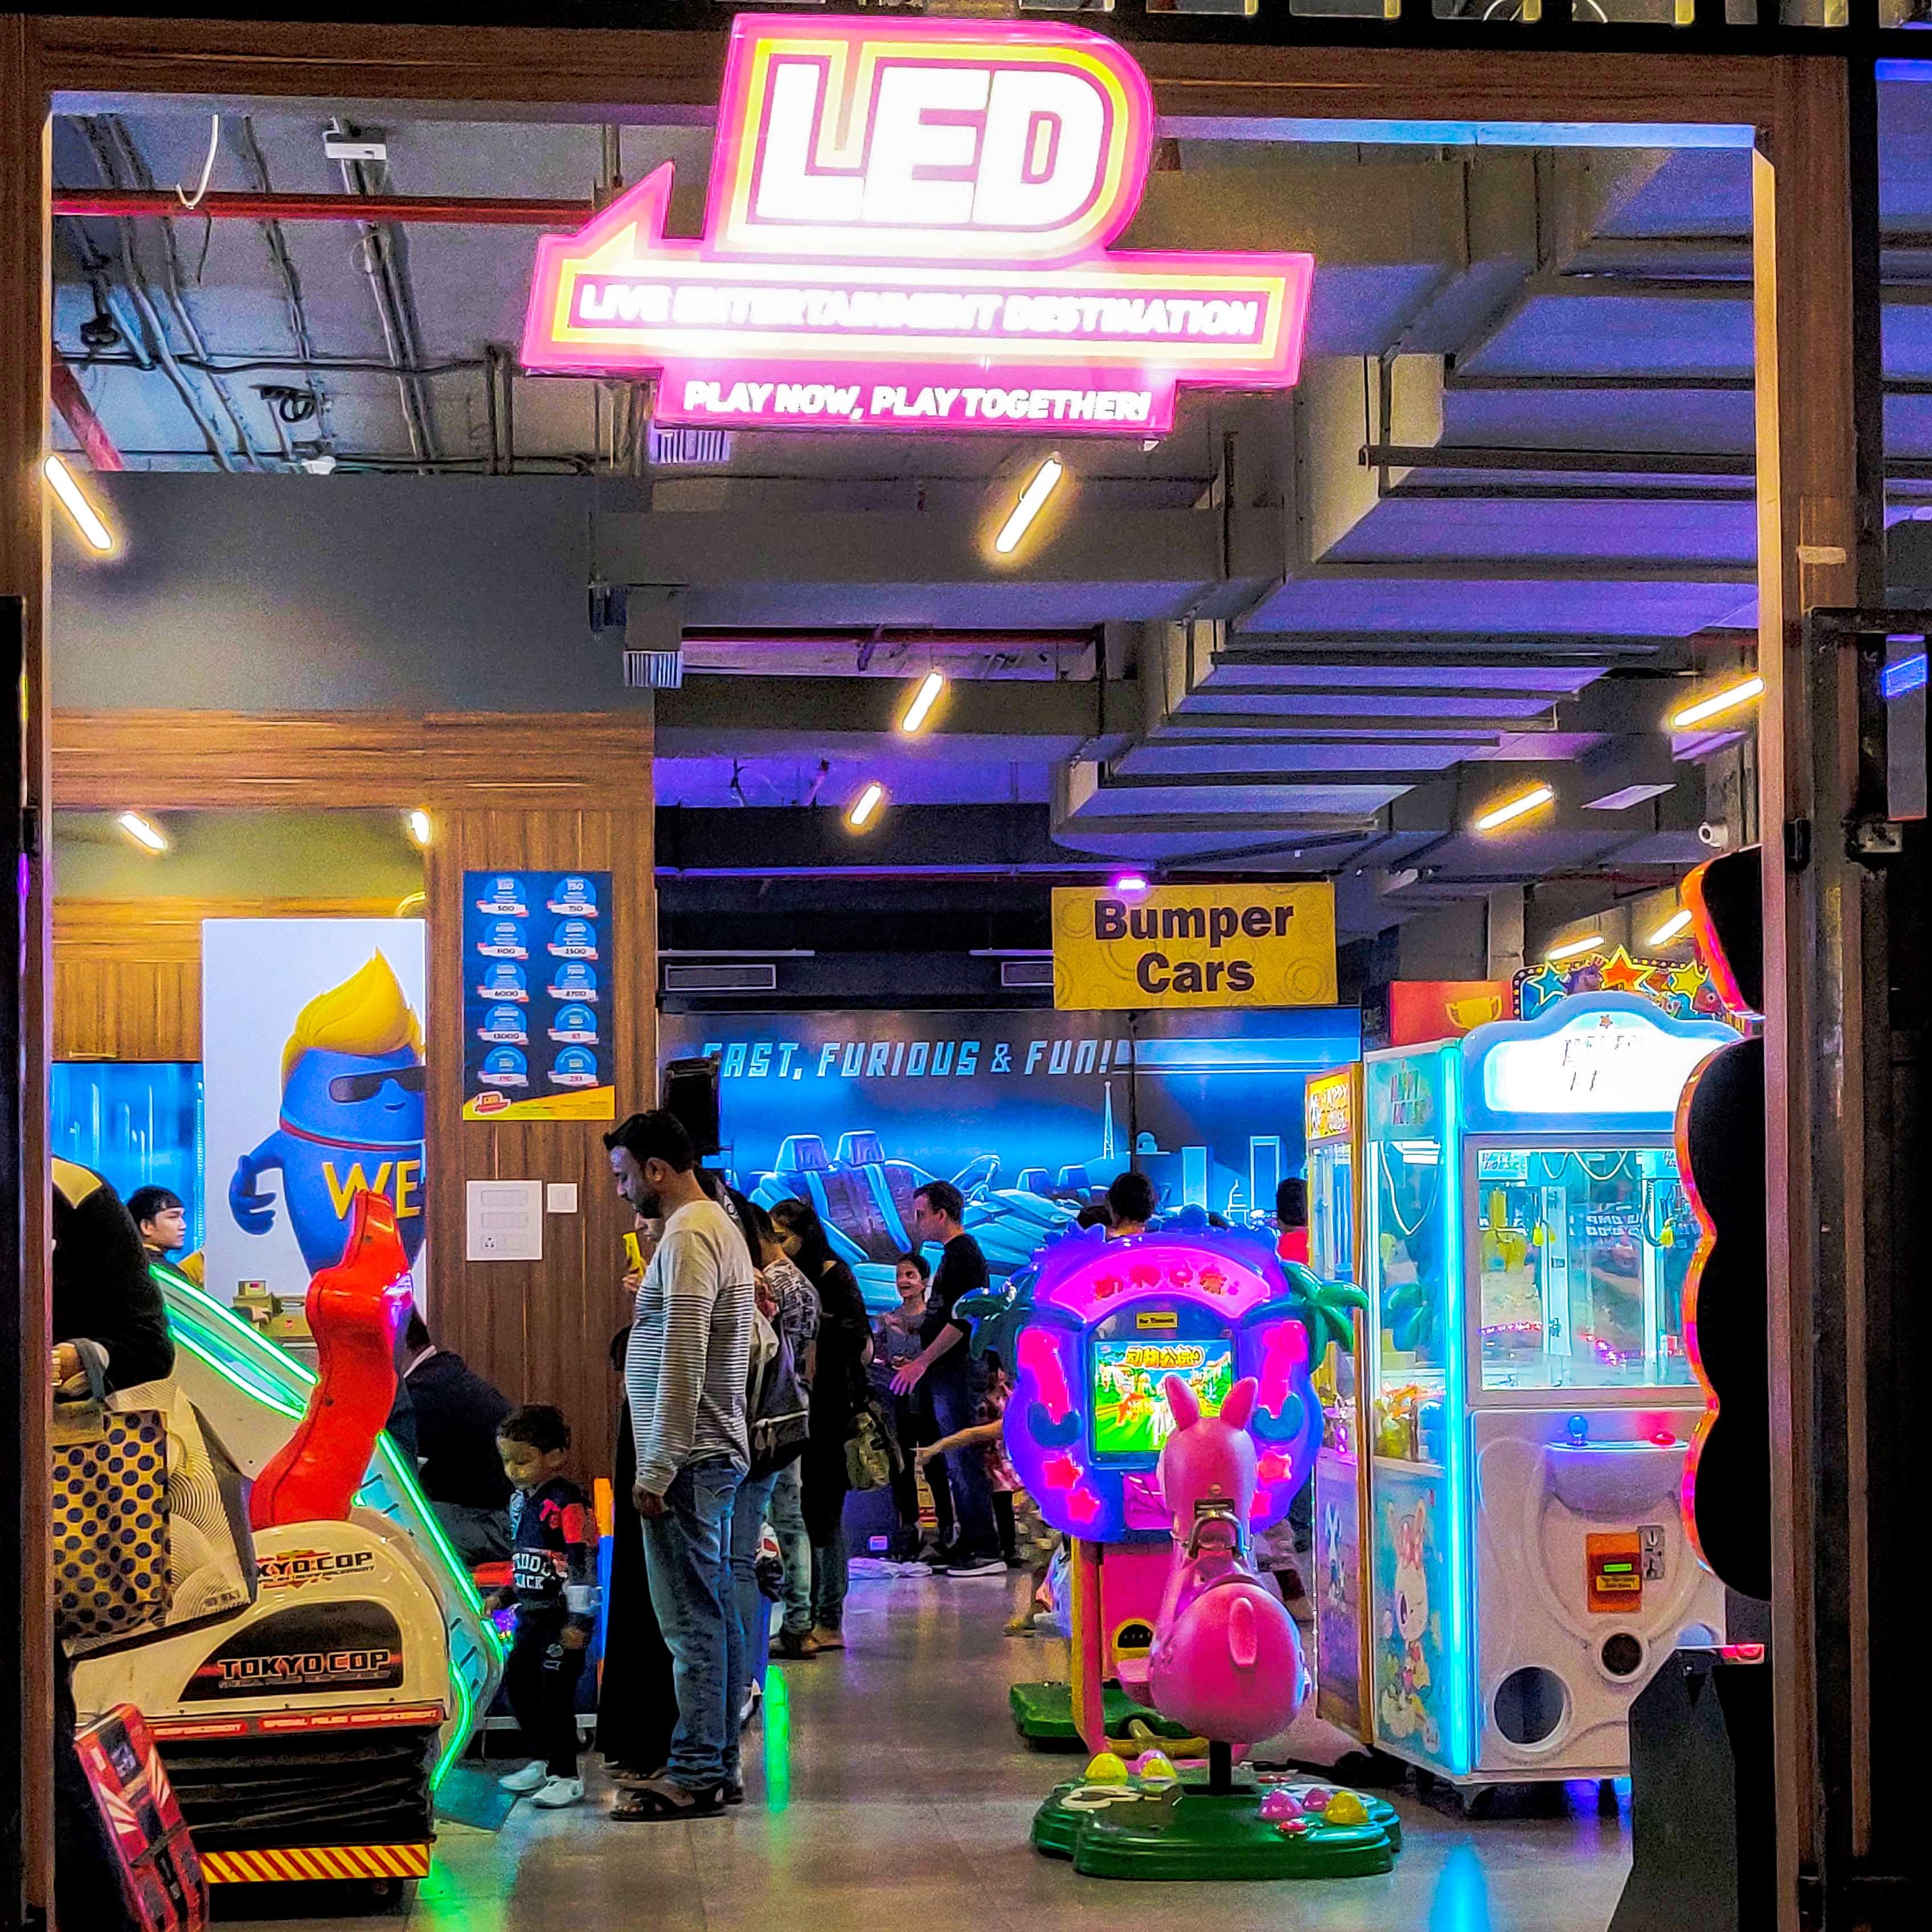 Games,Building,Machine,Neon,Electronic signage